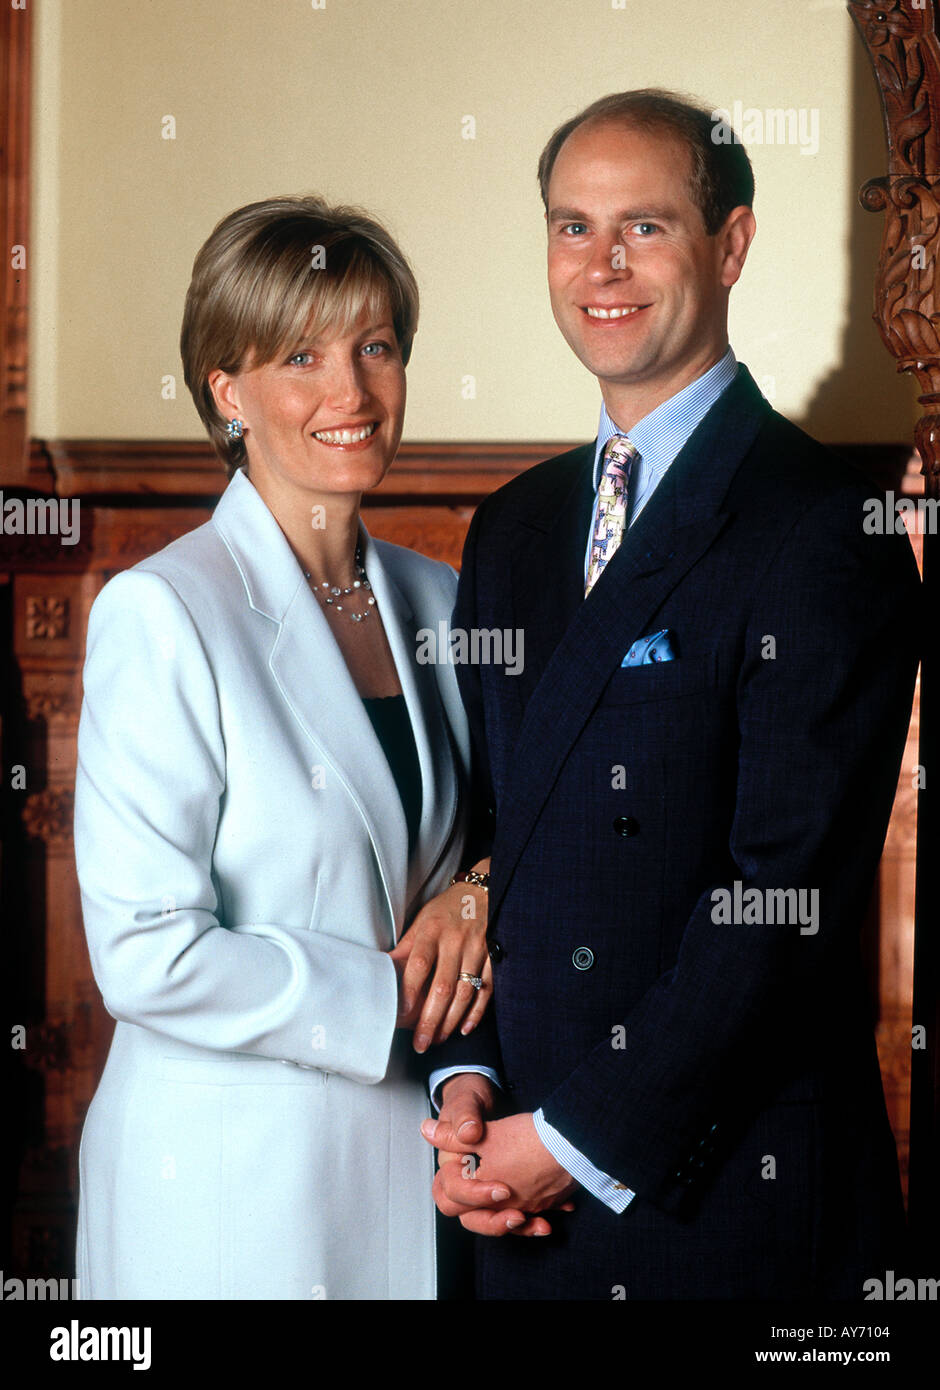 the-earl-and-countess-of-wessex-photographed-at-their-home-bagshot-AY7104.jpg